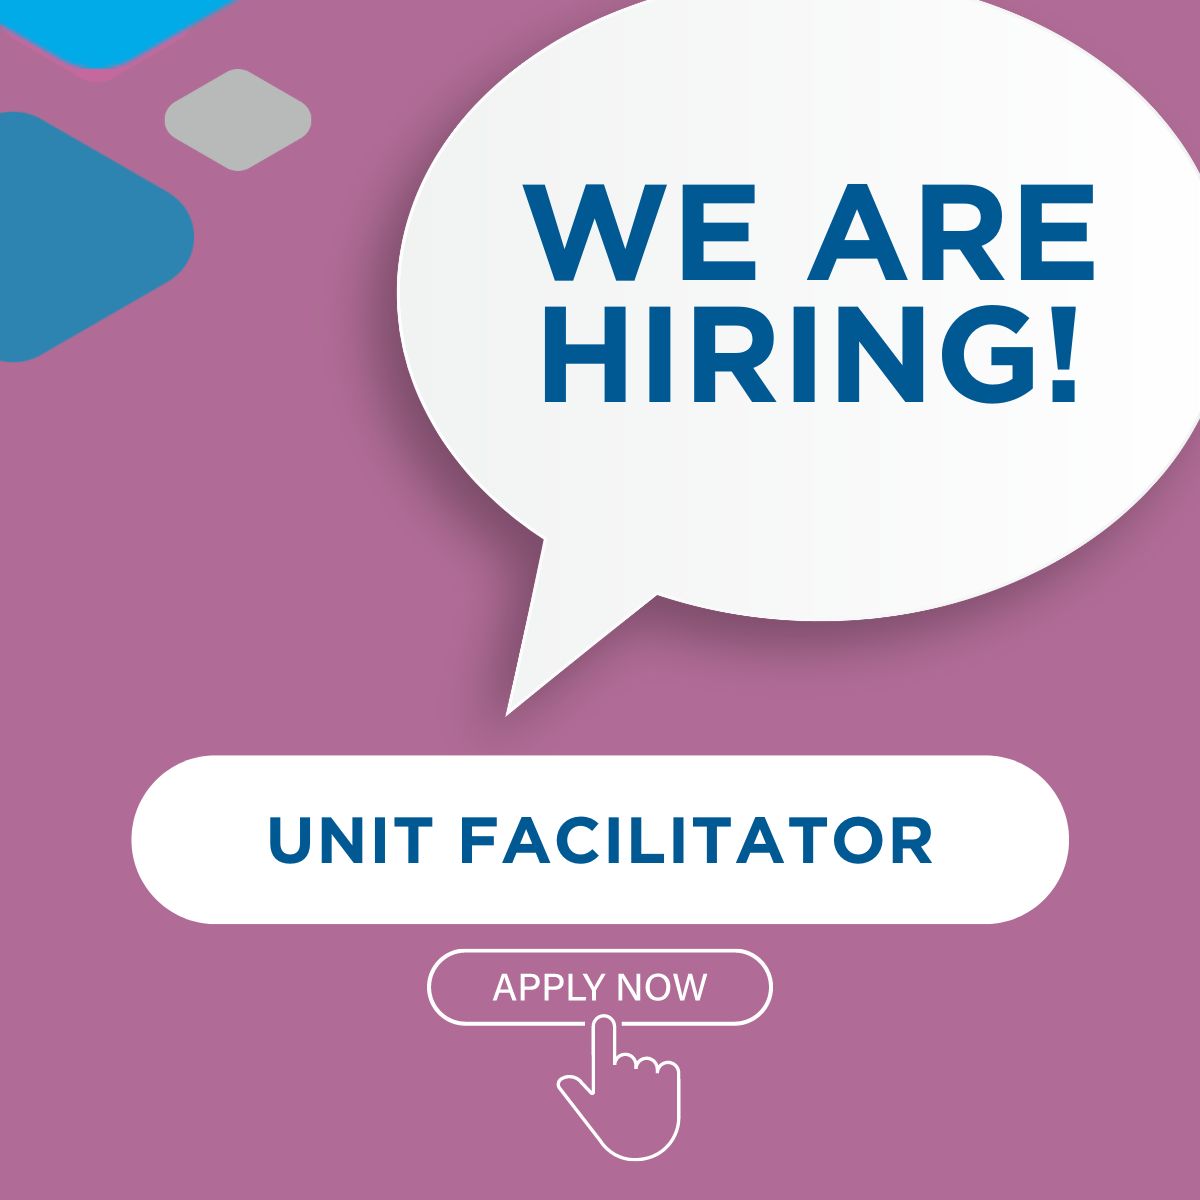 We are recruiting for a Unit Facilitator to join our clinical team in the UK! 👉 Find out more about this exciting opportunity here: vanguardhealthcare.co.uk/about/careers/… #VanguardHealthcareSolutions #Recruiting